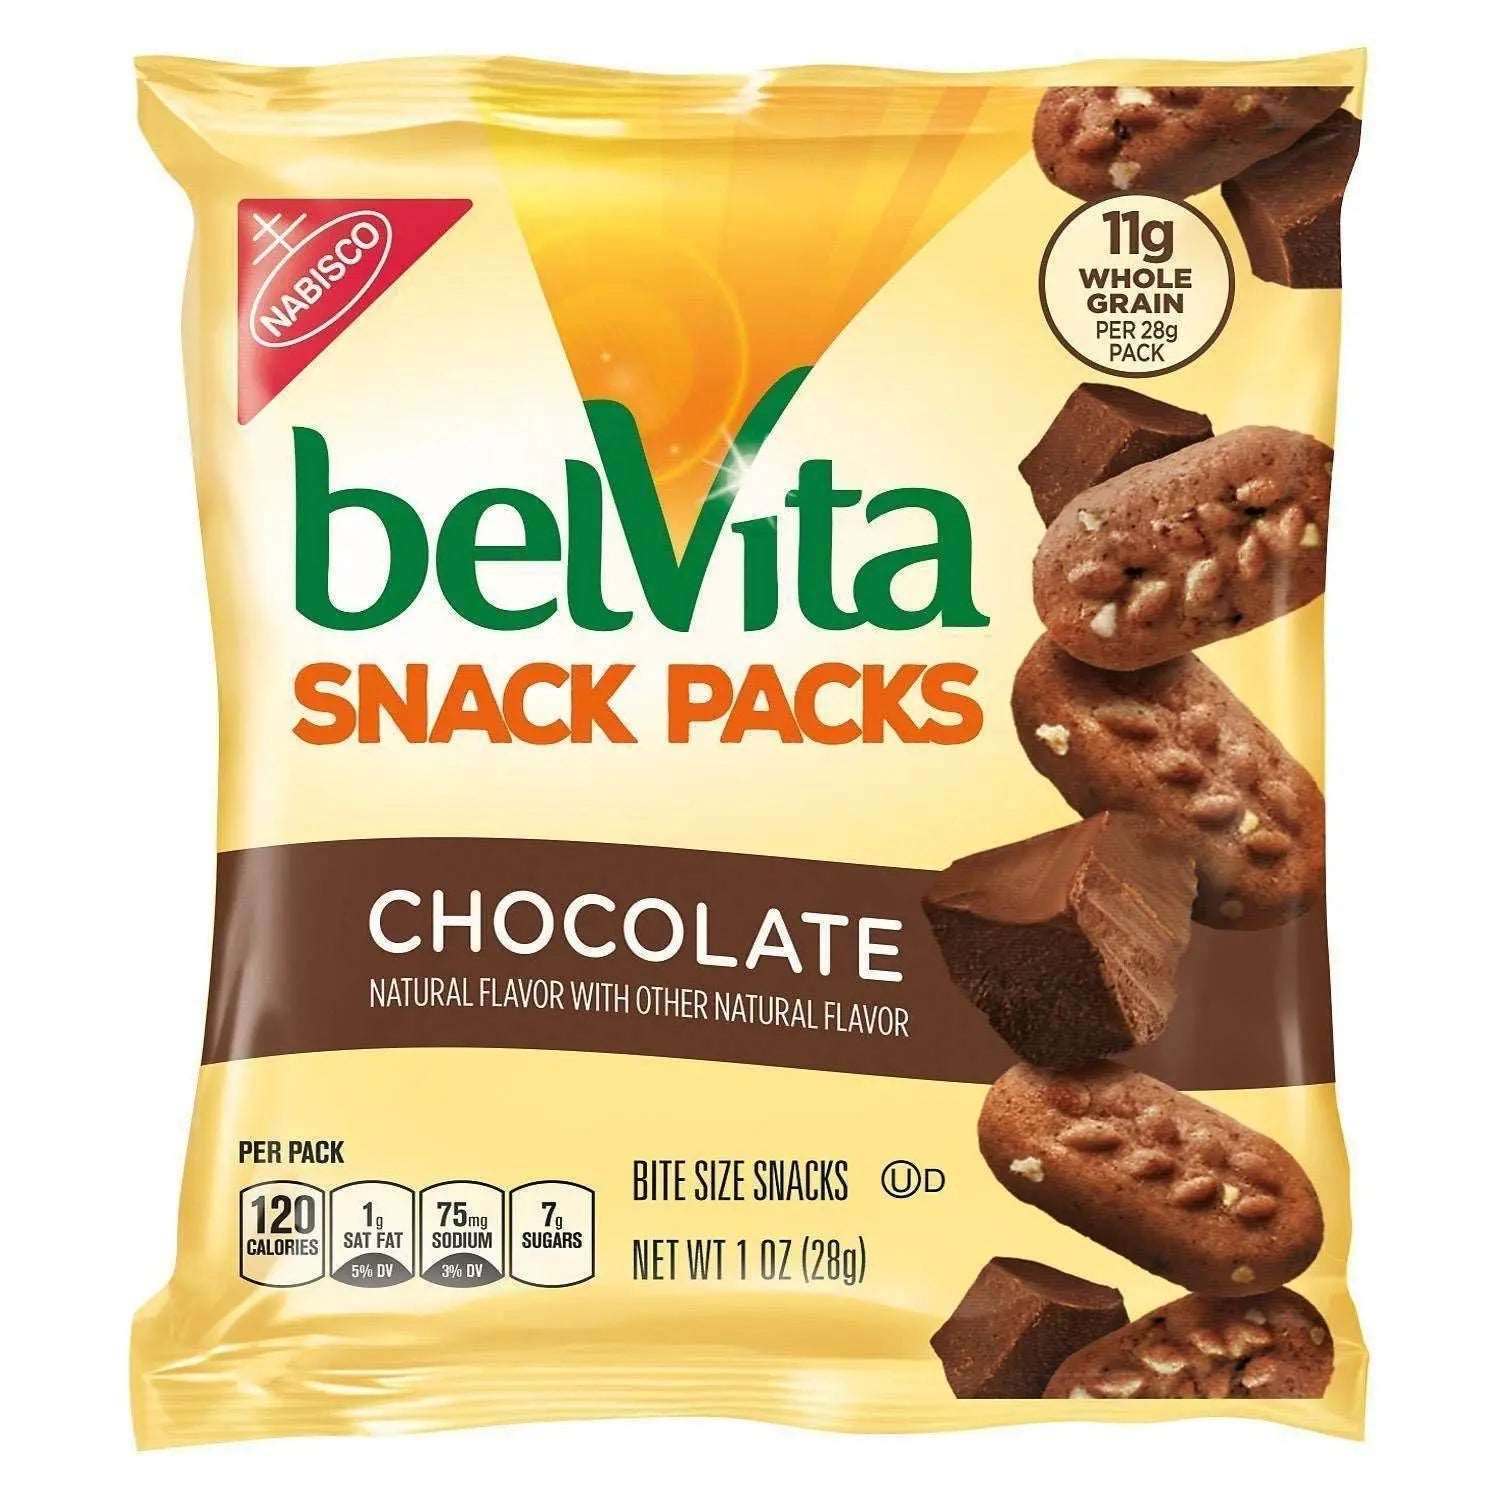 Wholesale prices with free shipping all over United States belVita Breakfast Biscuit Bites Variety Pack (36 pk.) - Steven Deals